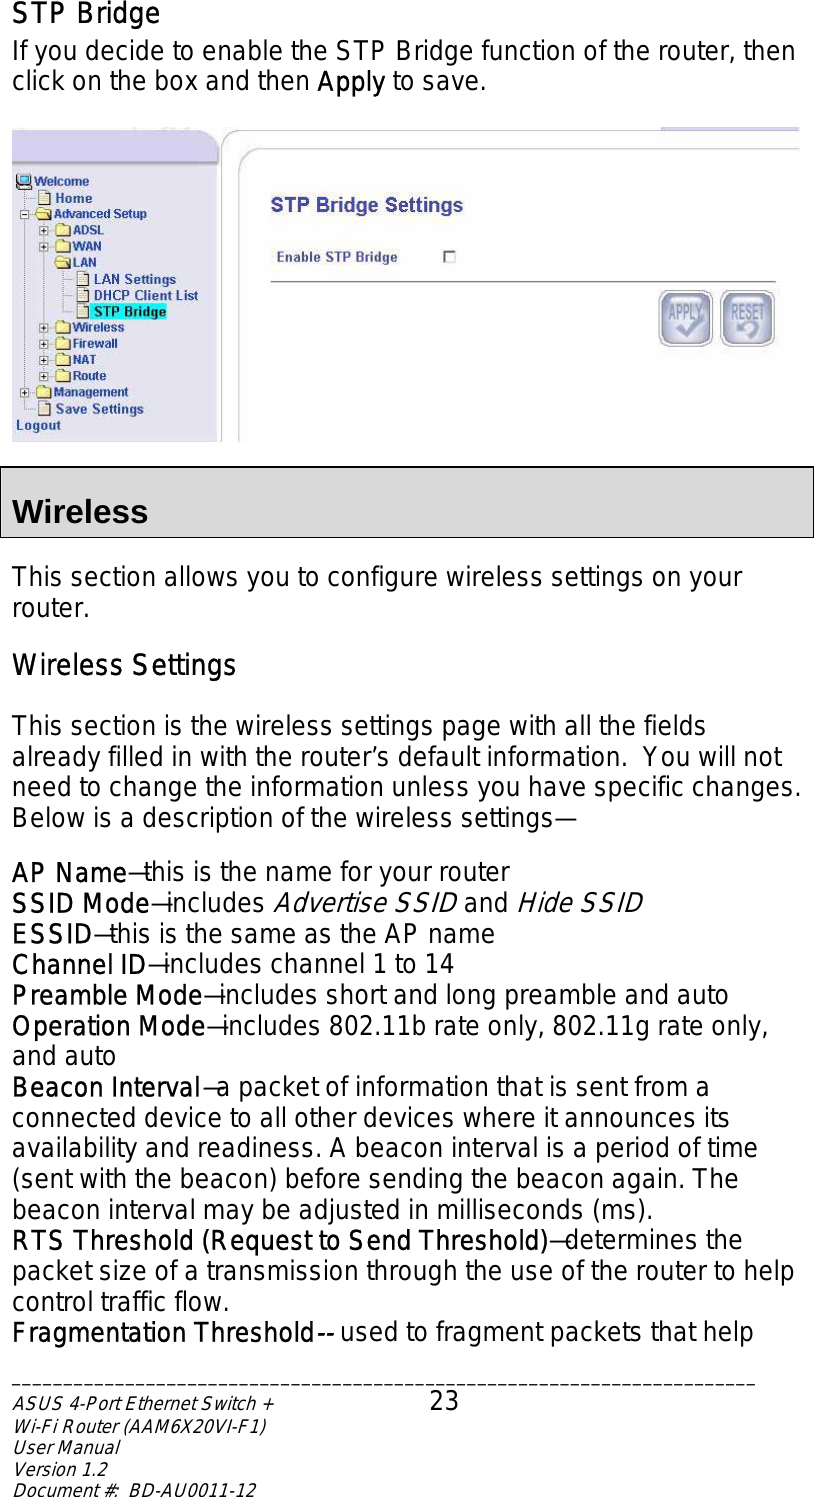 STP Bridge If you decide to enable the STP Bridge function of the router, then click on the box and then Apply to save.    Wireless  This section allows you to configure wireless settings on your router.   Wireless Settings  This section is the wireless settings page with all the fields already filled in with the router’s default information.  You will not need to change the information unless you have specific changes.  Below is a description of the wireless settings—  AP Name—this is the name for your router SSID Mode—includes Advertise SSID and Hide SSID ESSID—this is the same as the AP name Channel ID—includes channel 1 to 14 Preamble Mode—includes short and long preamble and auto Operation Mode—includes 802.11b rate only, 802.11g rate only, and auto Beacon Interval—a packet of information that is sent from a connected device to all other devices where it announces its availability and readiness. A beacon interval is a period of time (sent with the beacon) before sending the beacon again. The beacon interval may be adjusted in milliseconds (ms). RTS Threshold (Request to Send Threshold)—determines the packet size of a transmission through the use of the router to help control traffic flow.  Fragmentation Threshold-- used to fragment packets that help ________________________________________________________________________ASUS 4-Port Ethernet Switch +  23 Wi-Fi Router (AAM6X20VI-F1) User Manual                                                                         Version 1.2 Document #:  BD-AU0011-12  